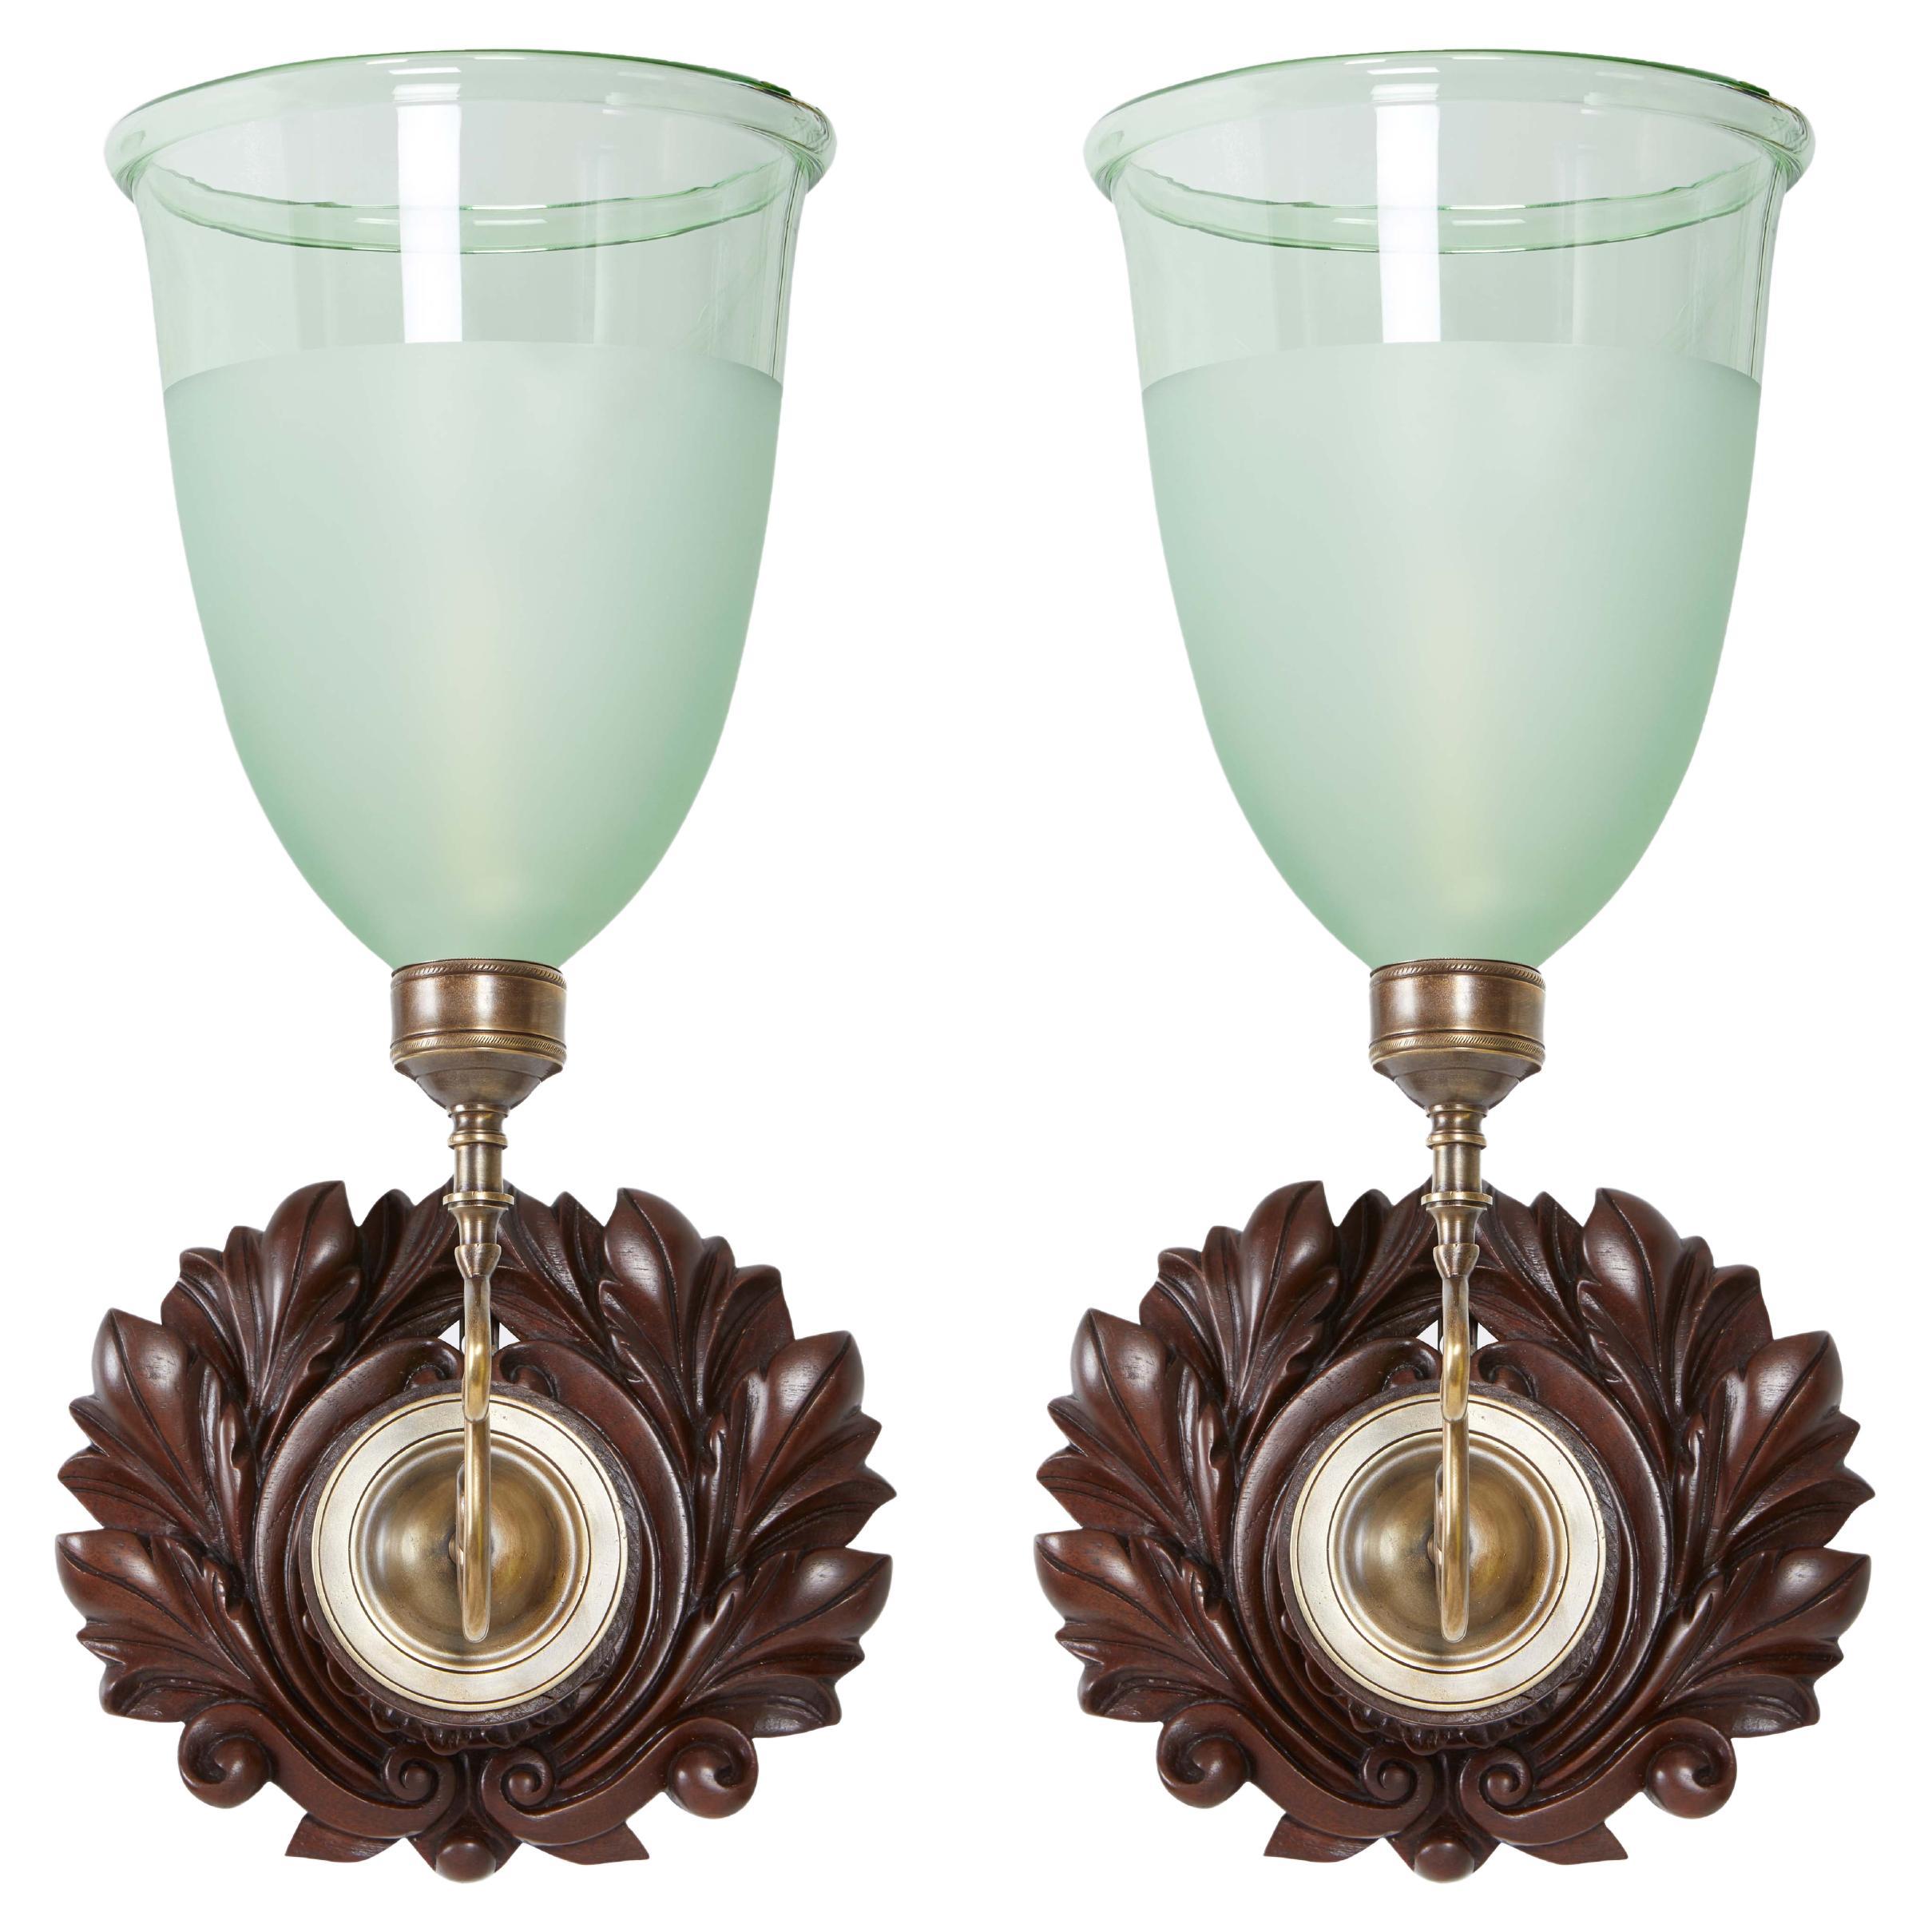 David Duncan Sconces with Large Wreath backplates and Green Frosted Shades For Sale